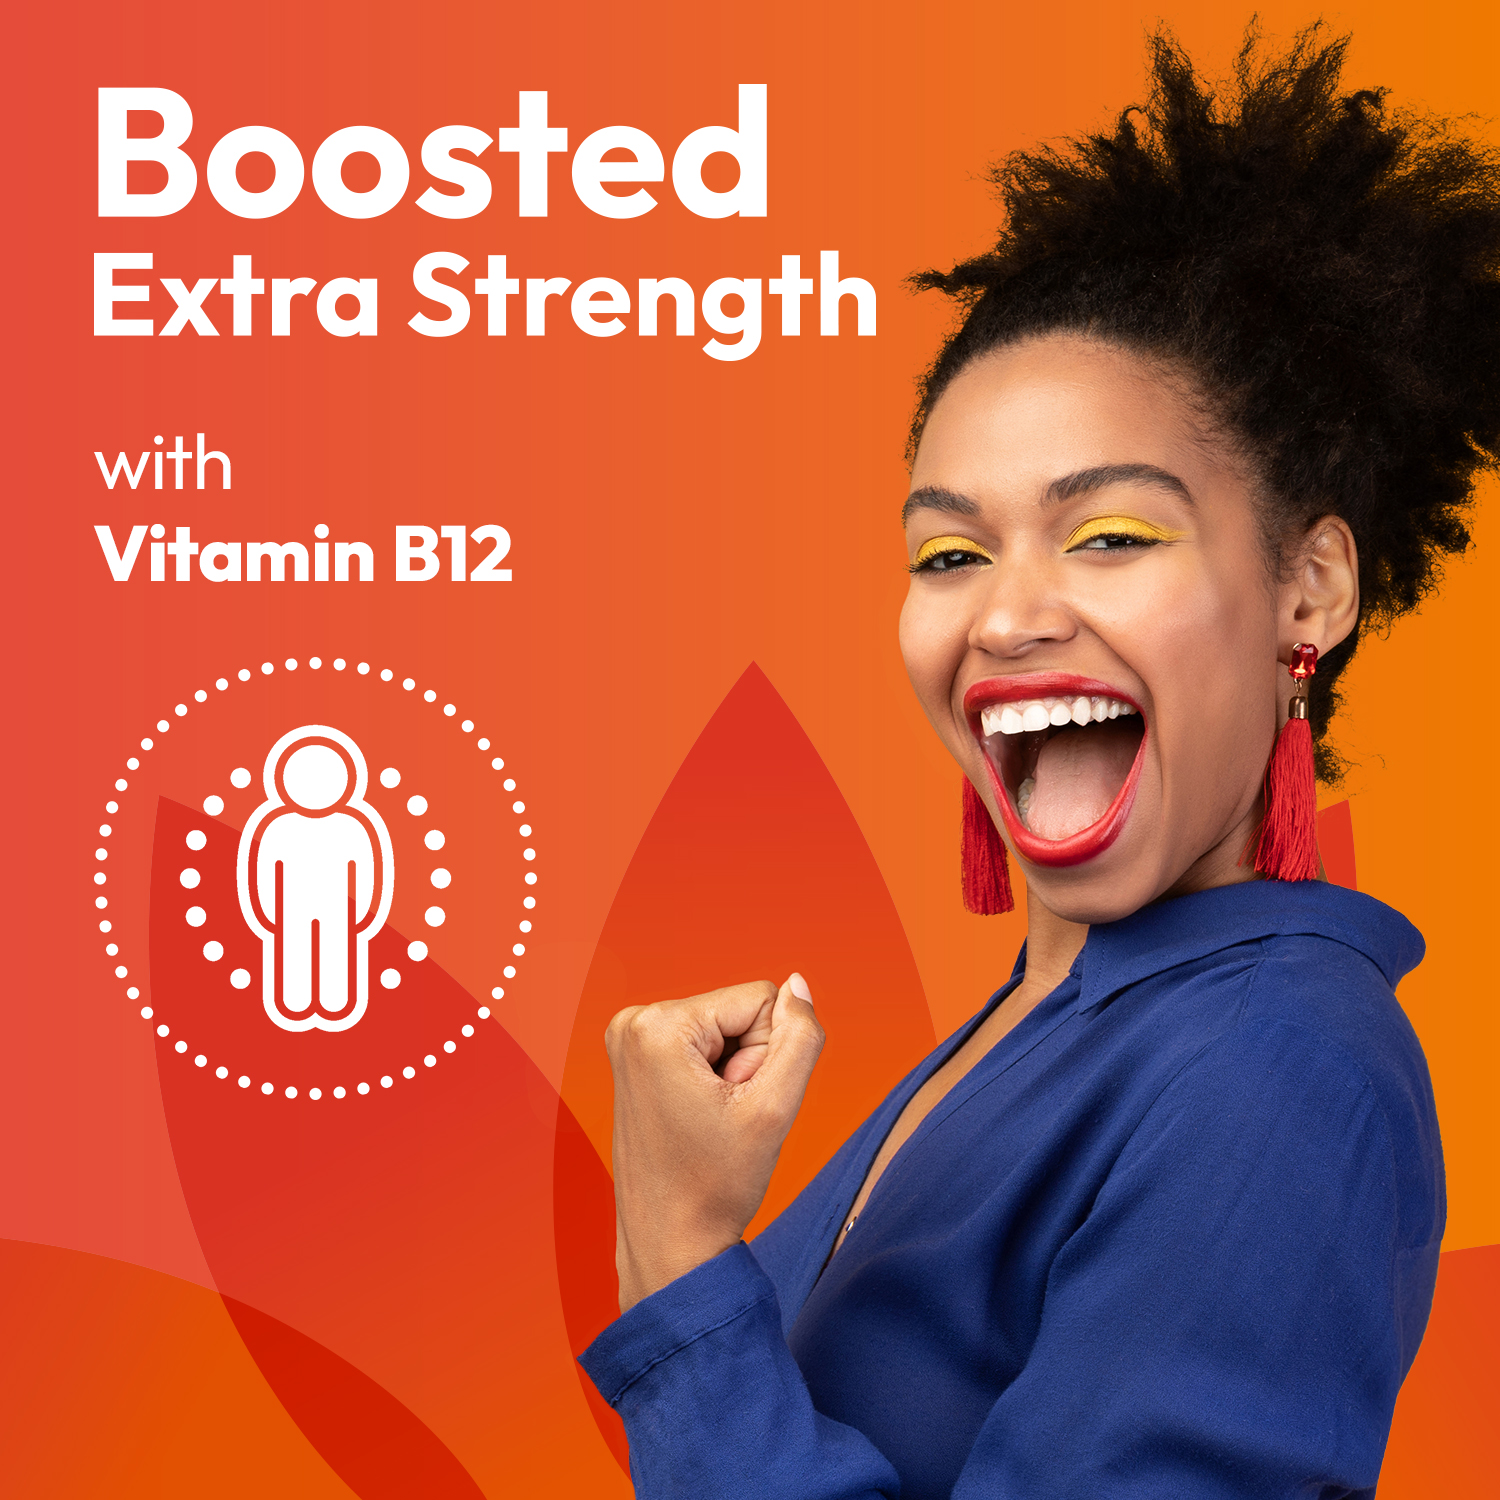 Boosted Extra strength with vitamin b12.